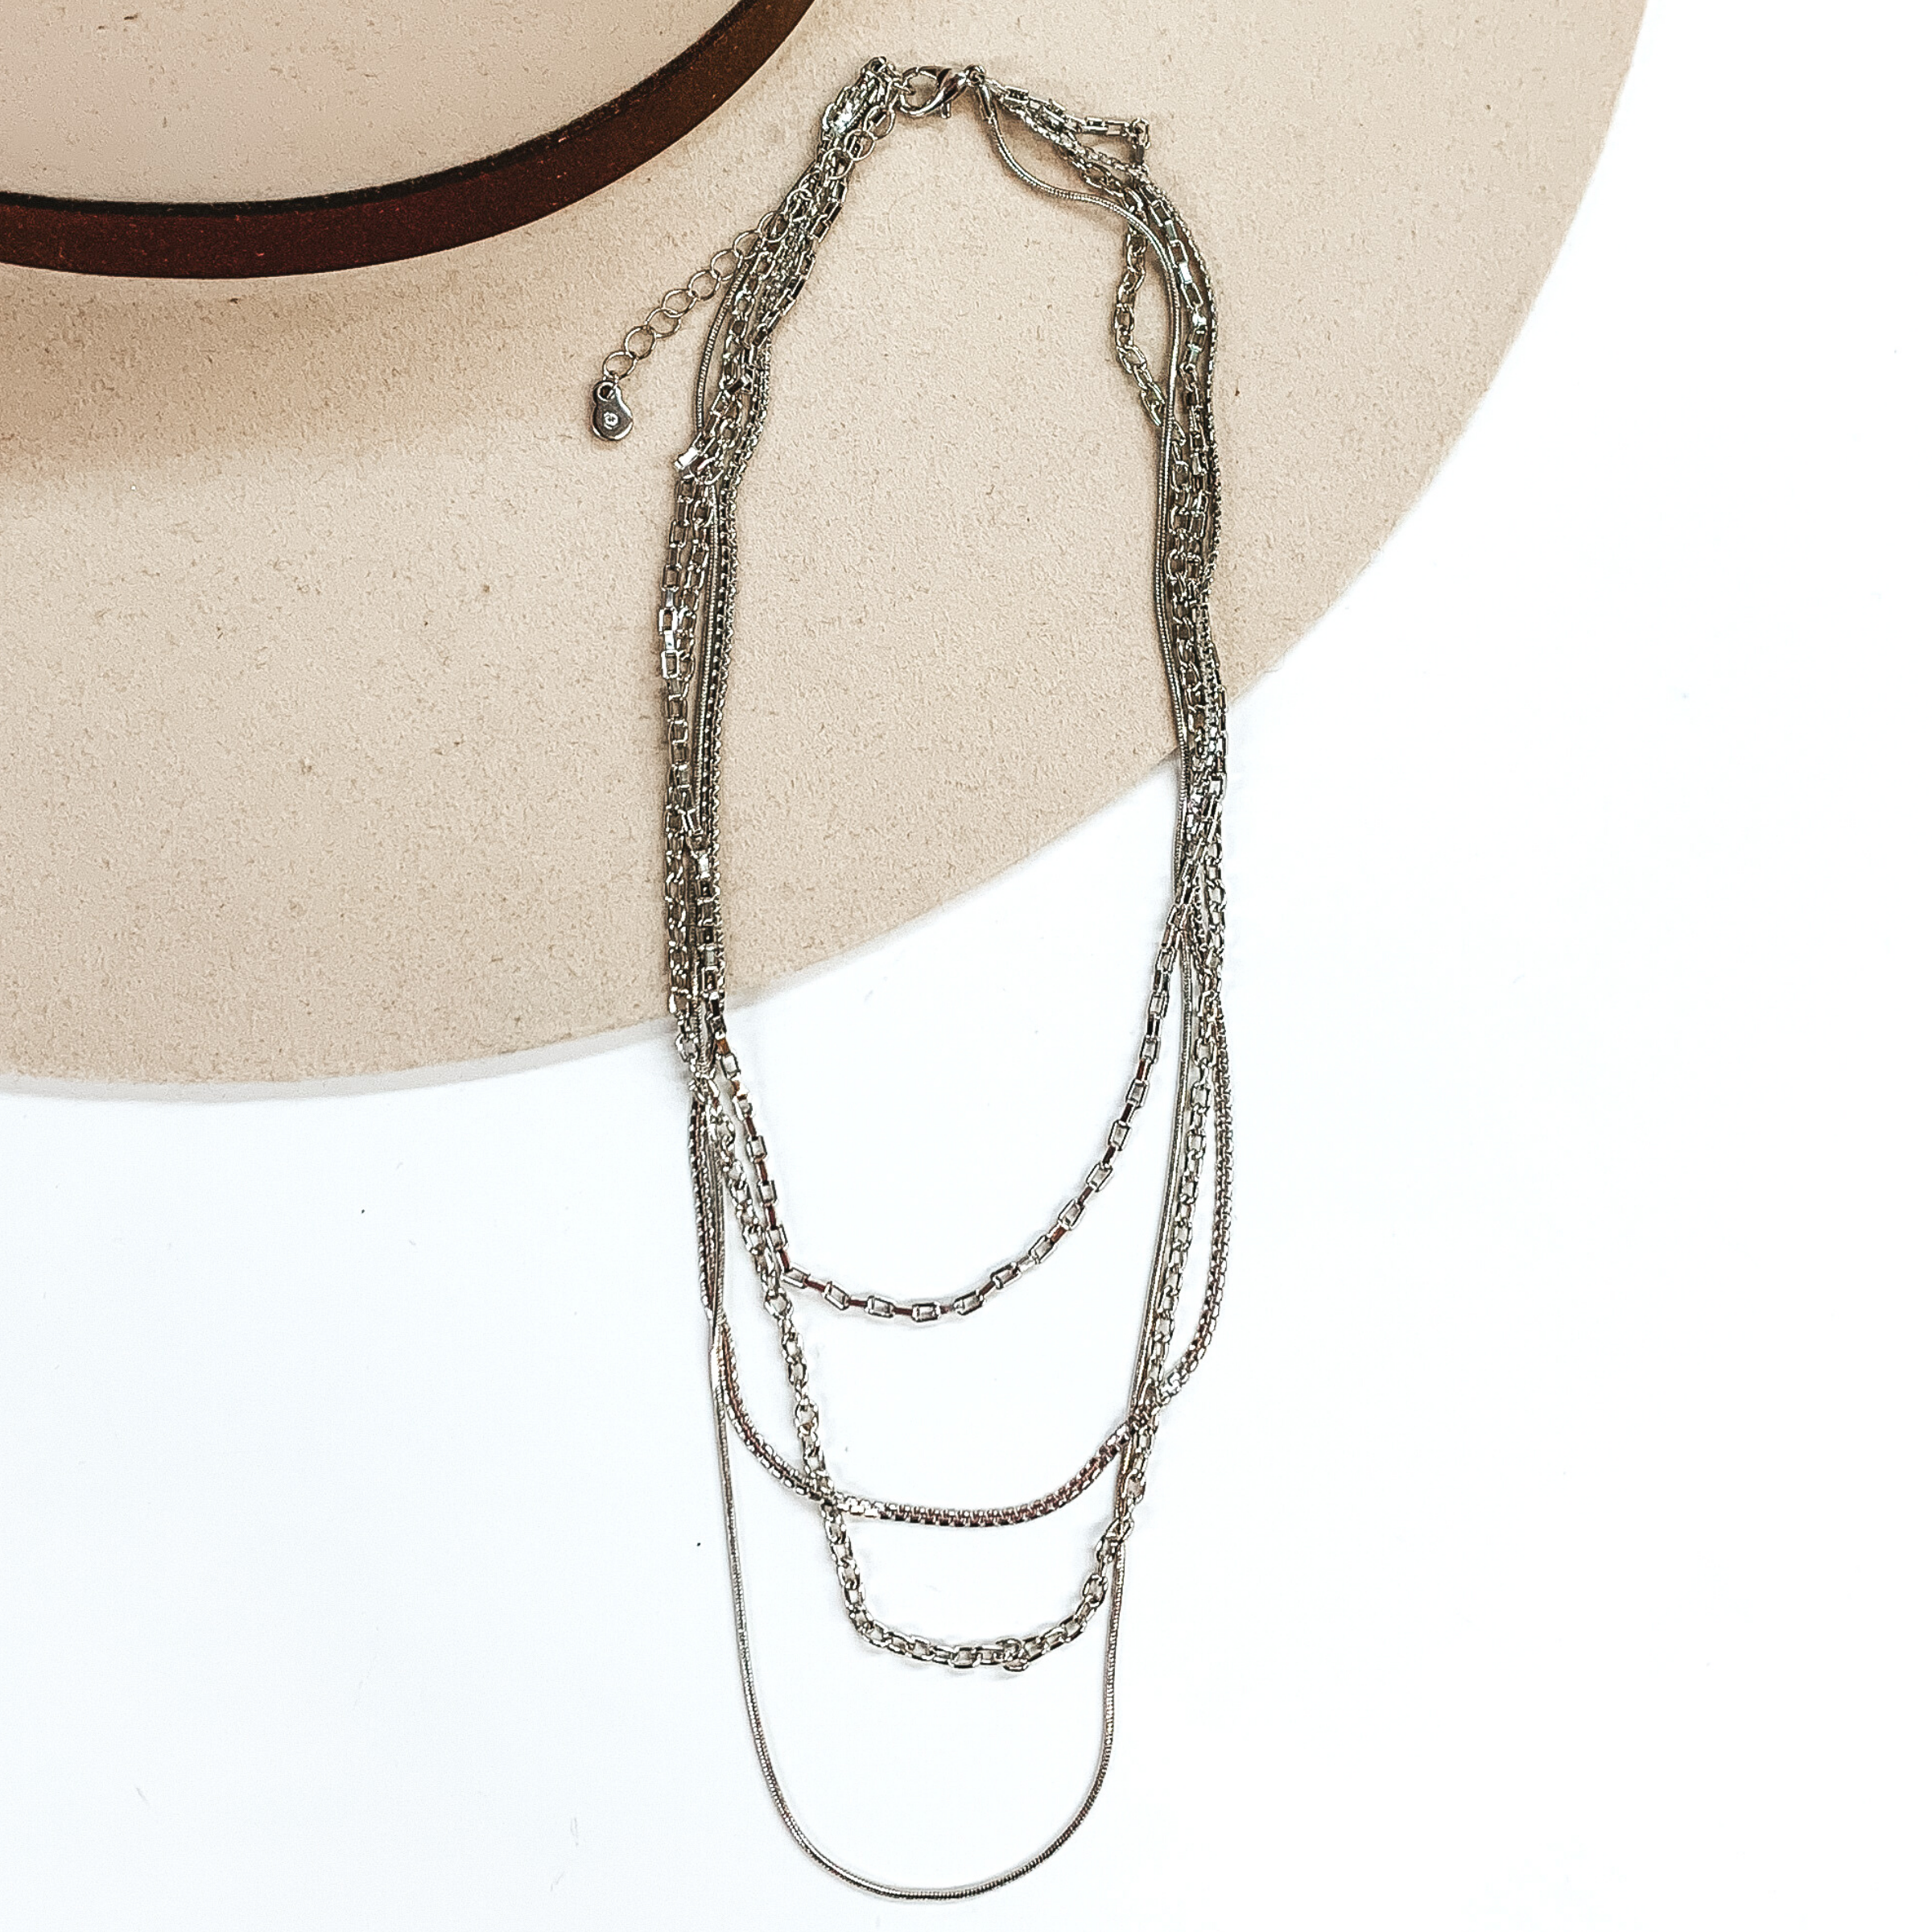 This is a silver, four stranded necklace that has different types of chains at different lengths. These necklaces are pictured partially laying on top of a beige hat brim on a white background.